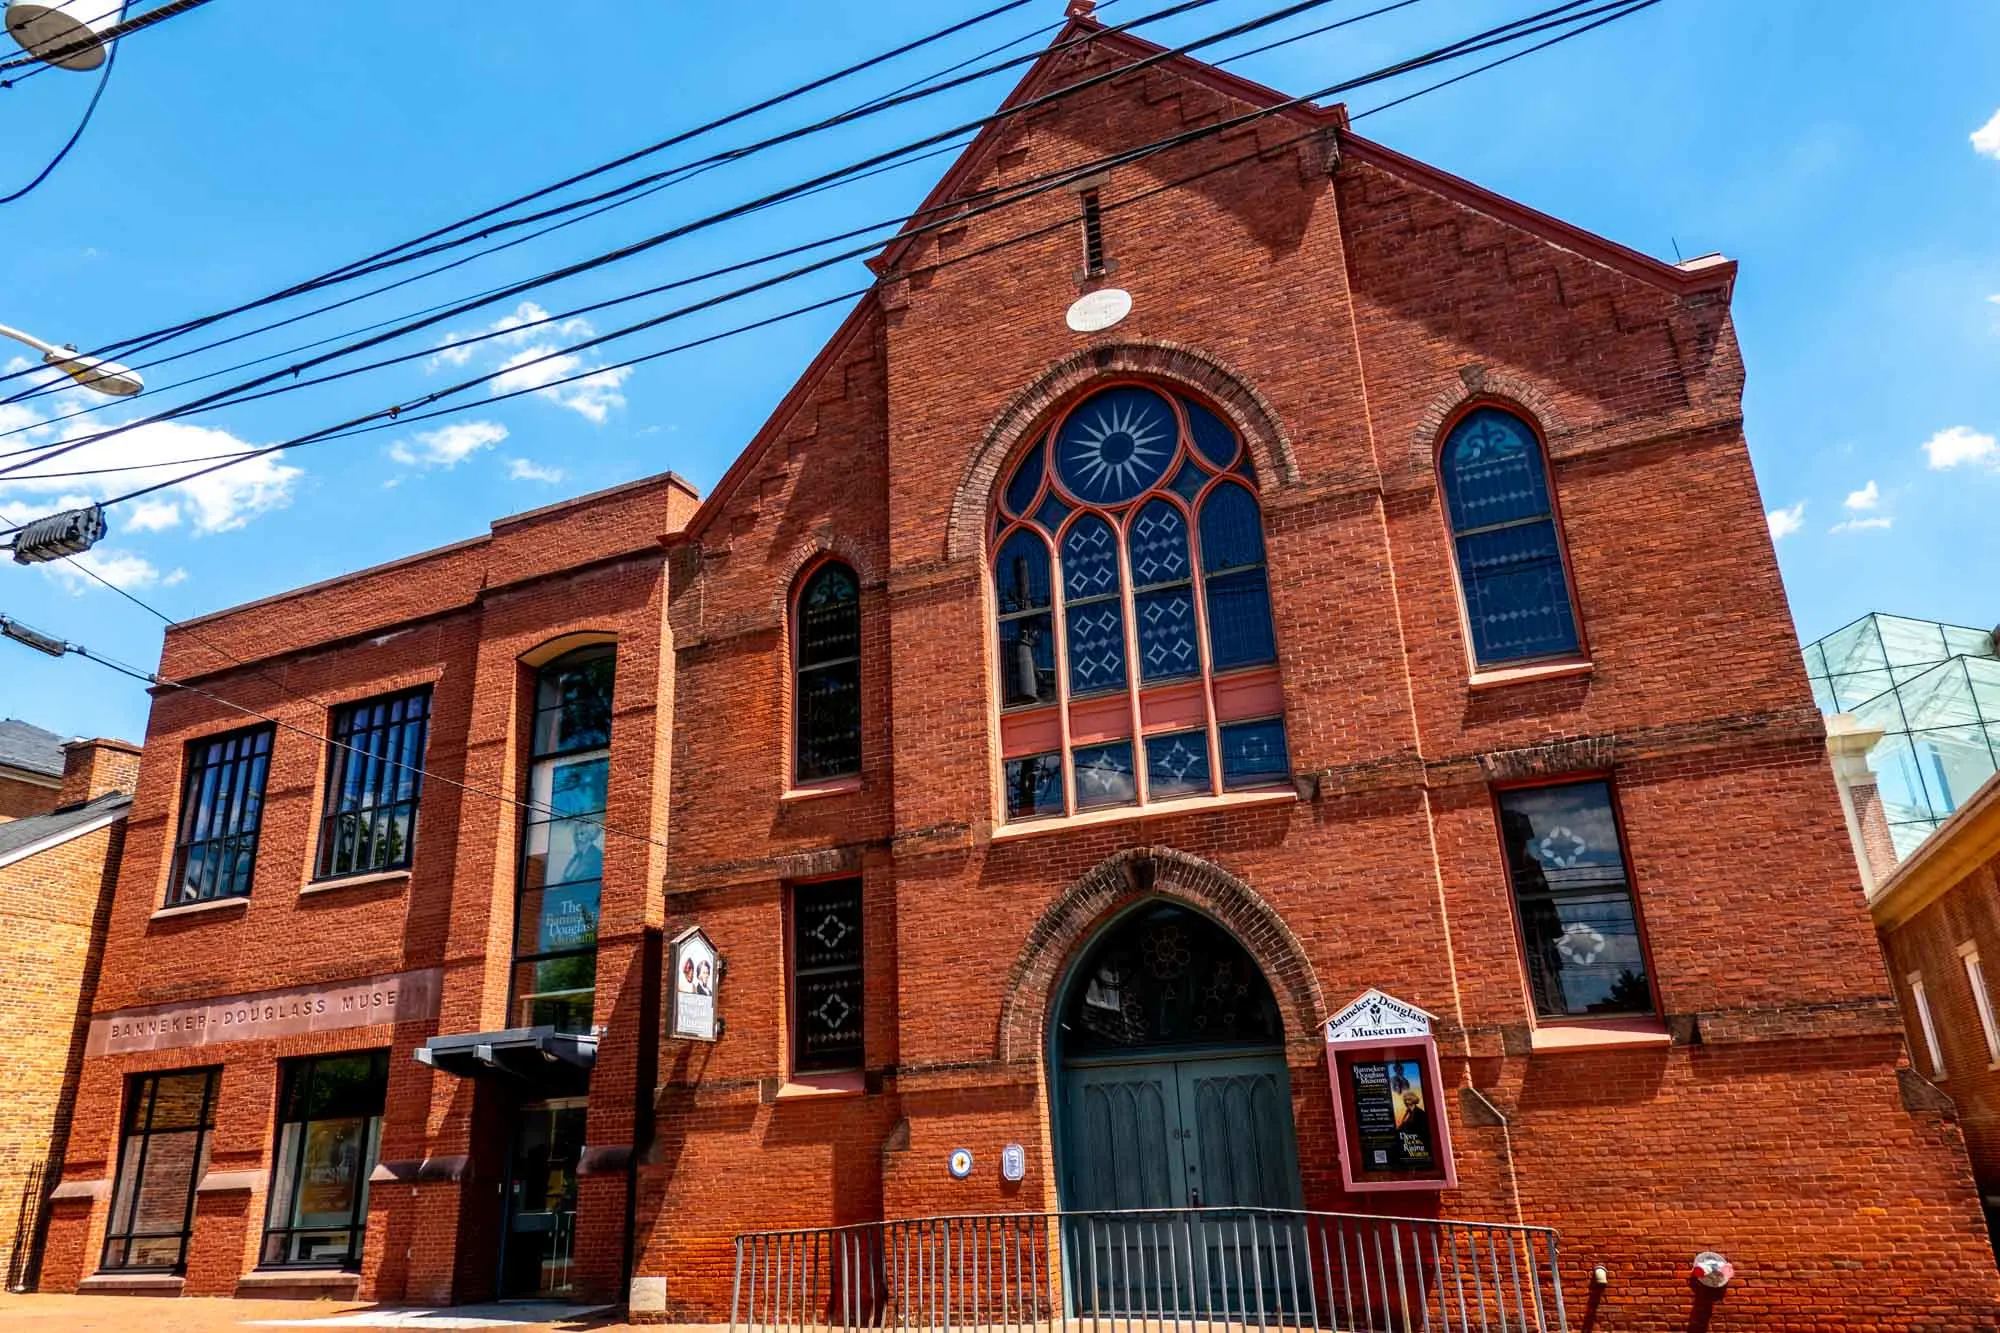 Exterior of a red brick church with stained glass windows